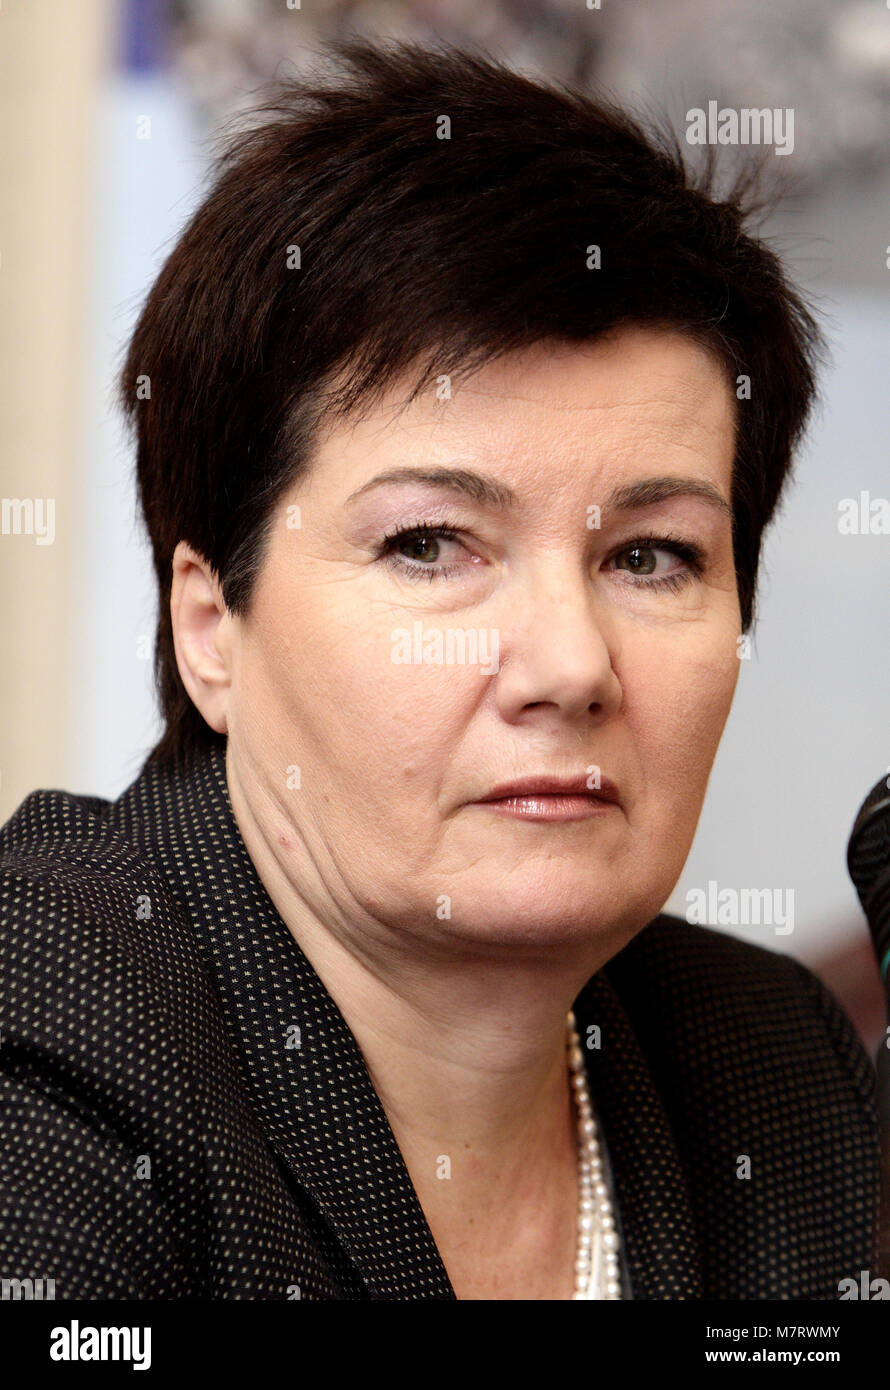 Warsaw, Masovia / Poland - 2007/11/28: Hanna Gronkiewicz-Waltz, Mayor of Warsaw and one of leaders of Civic Platform party PO - during press meetin Stock Photo